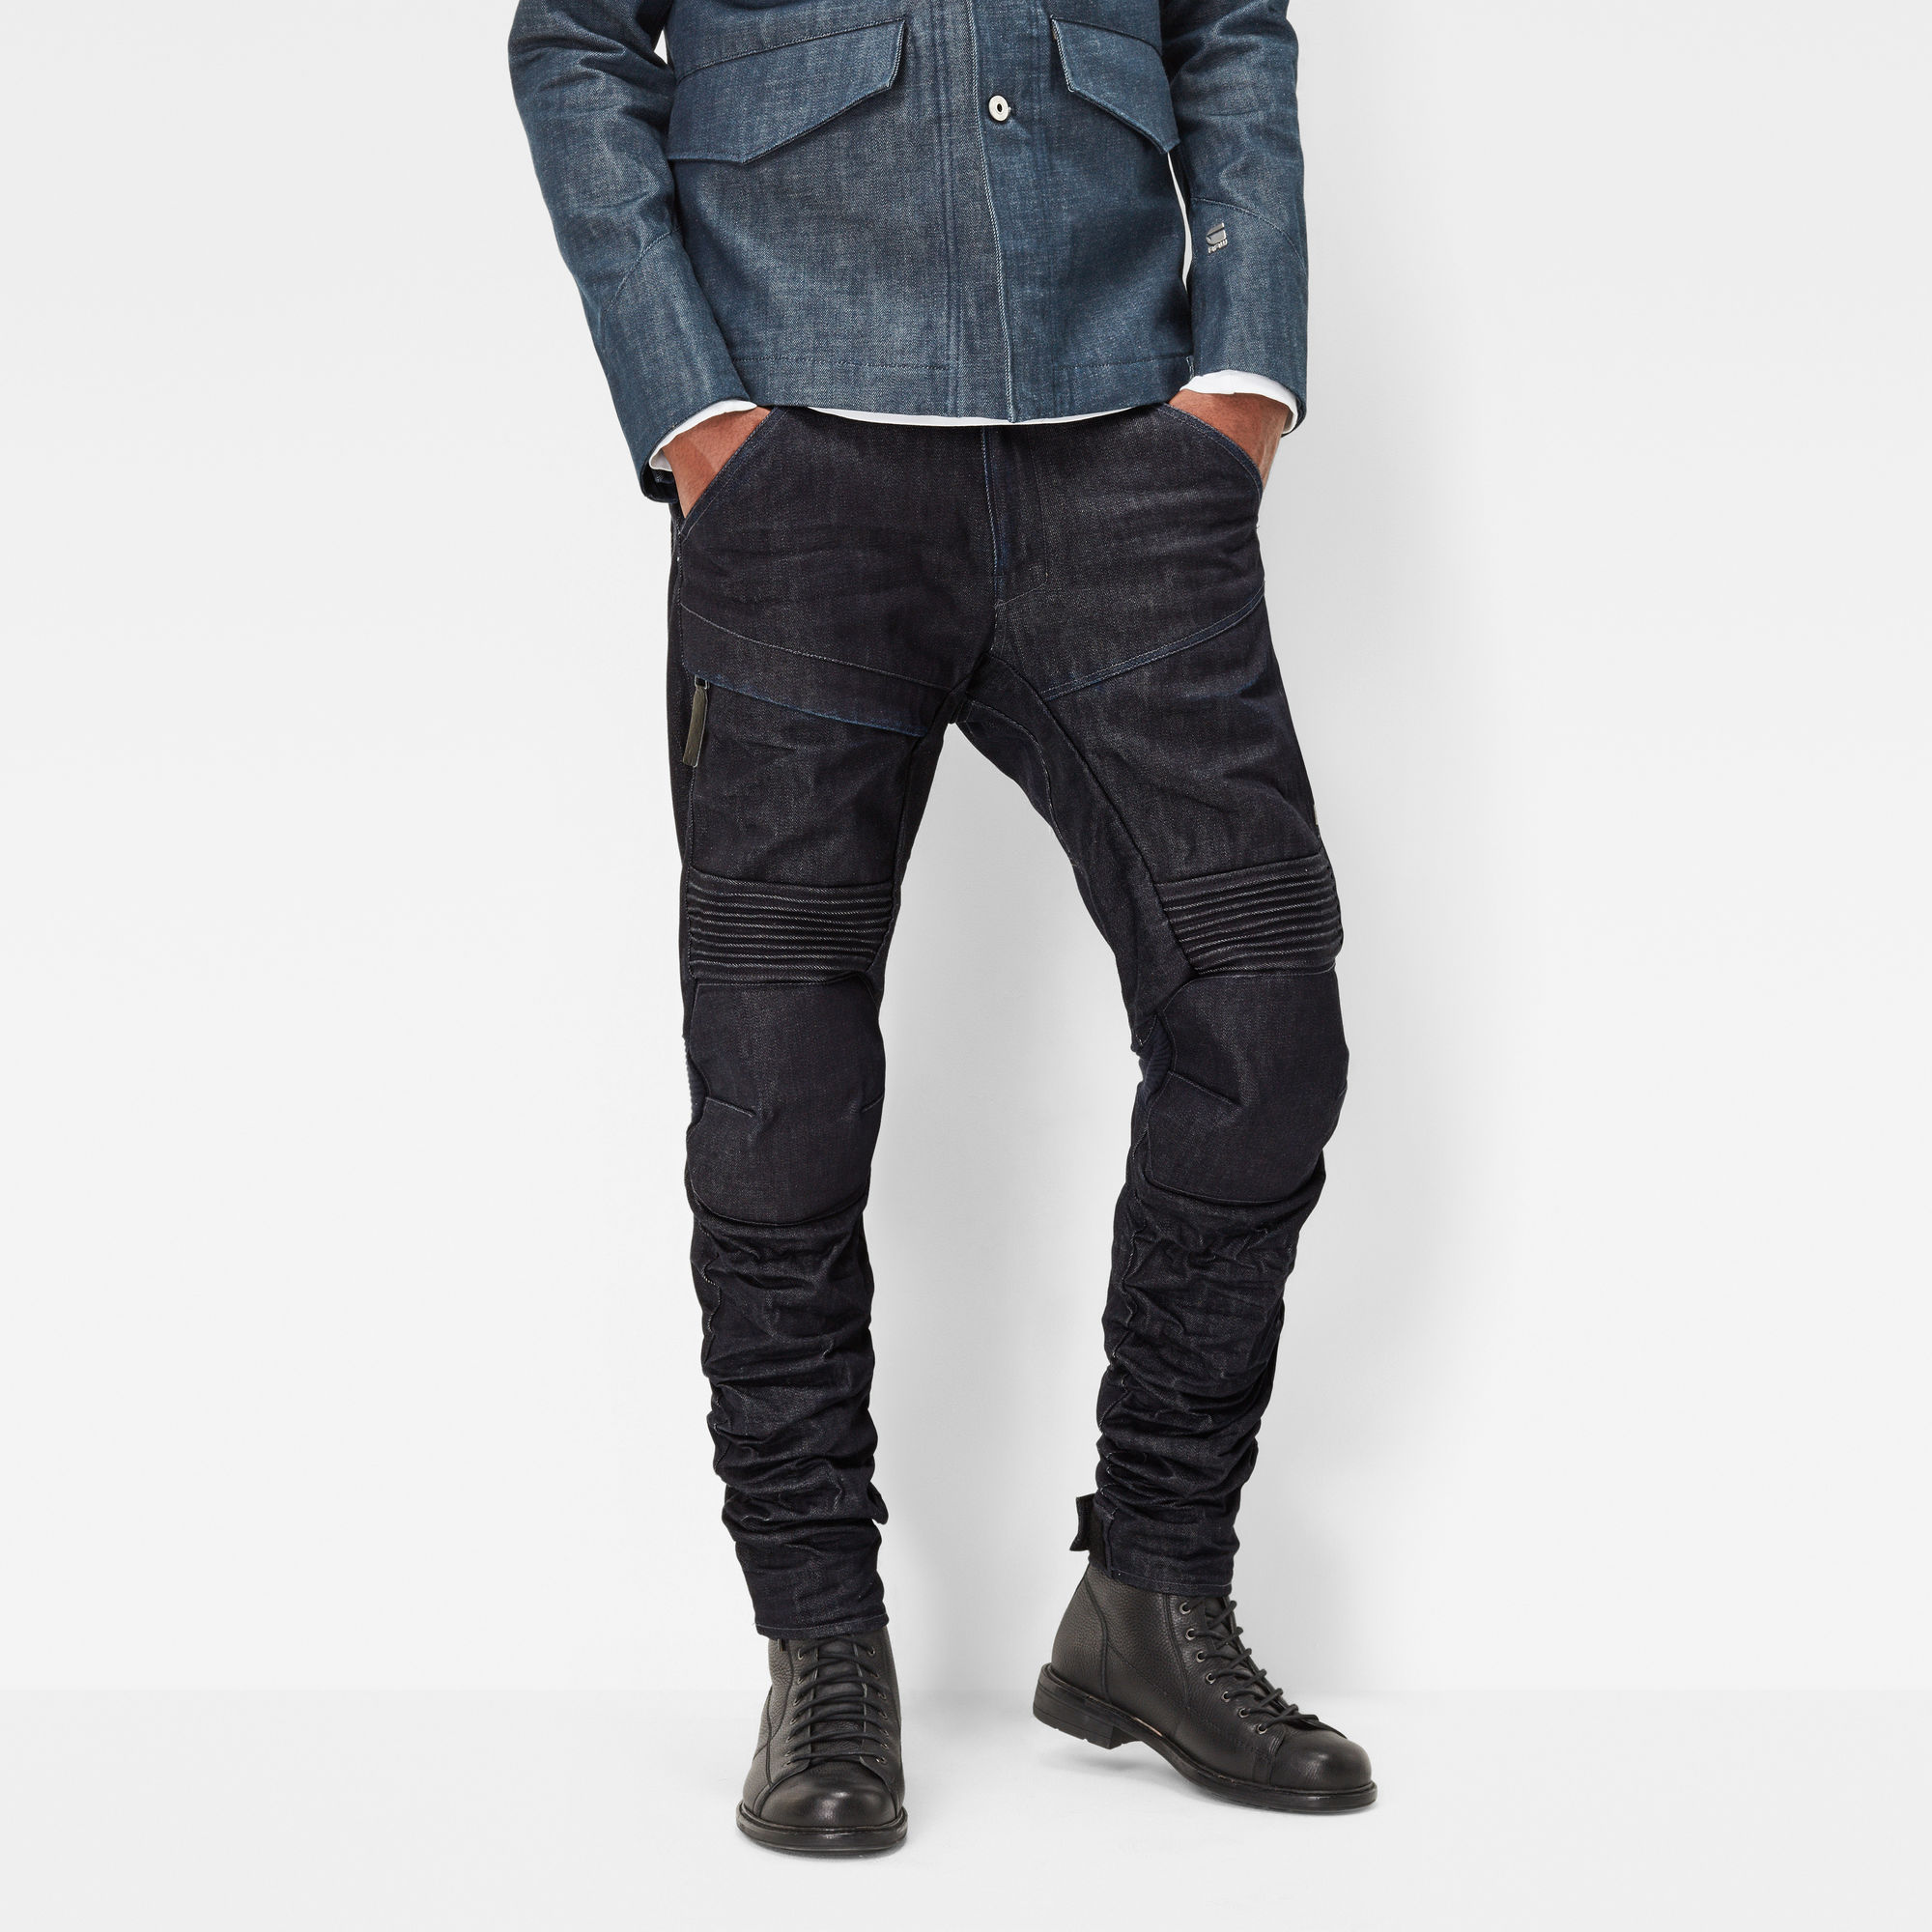 5620 G-Star Elwood Motion 3D Tapered Jeans | G-Star RAW®